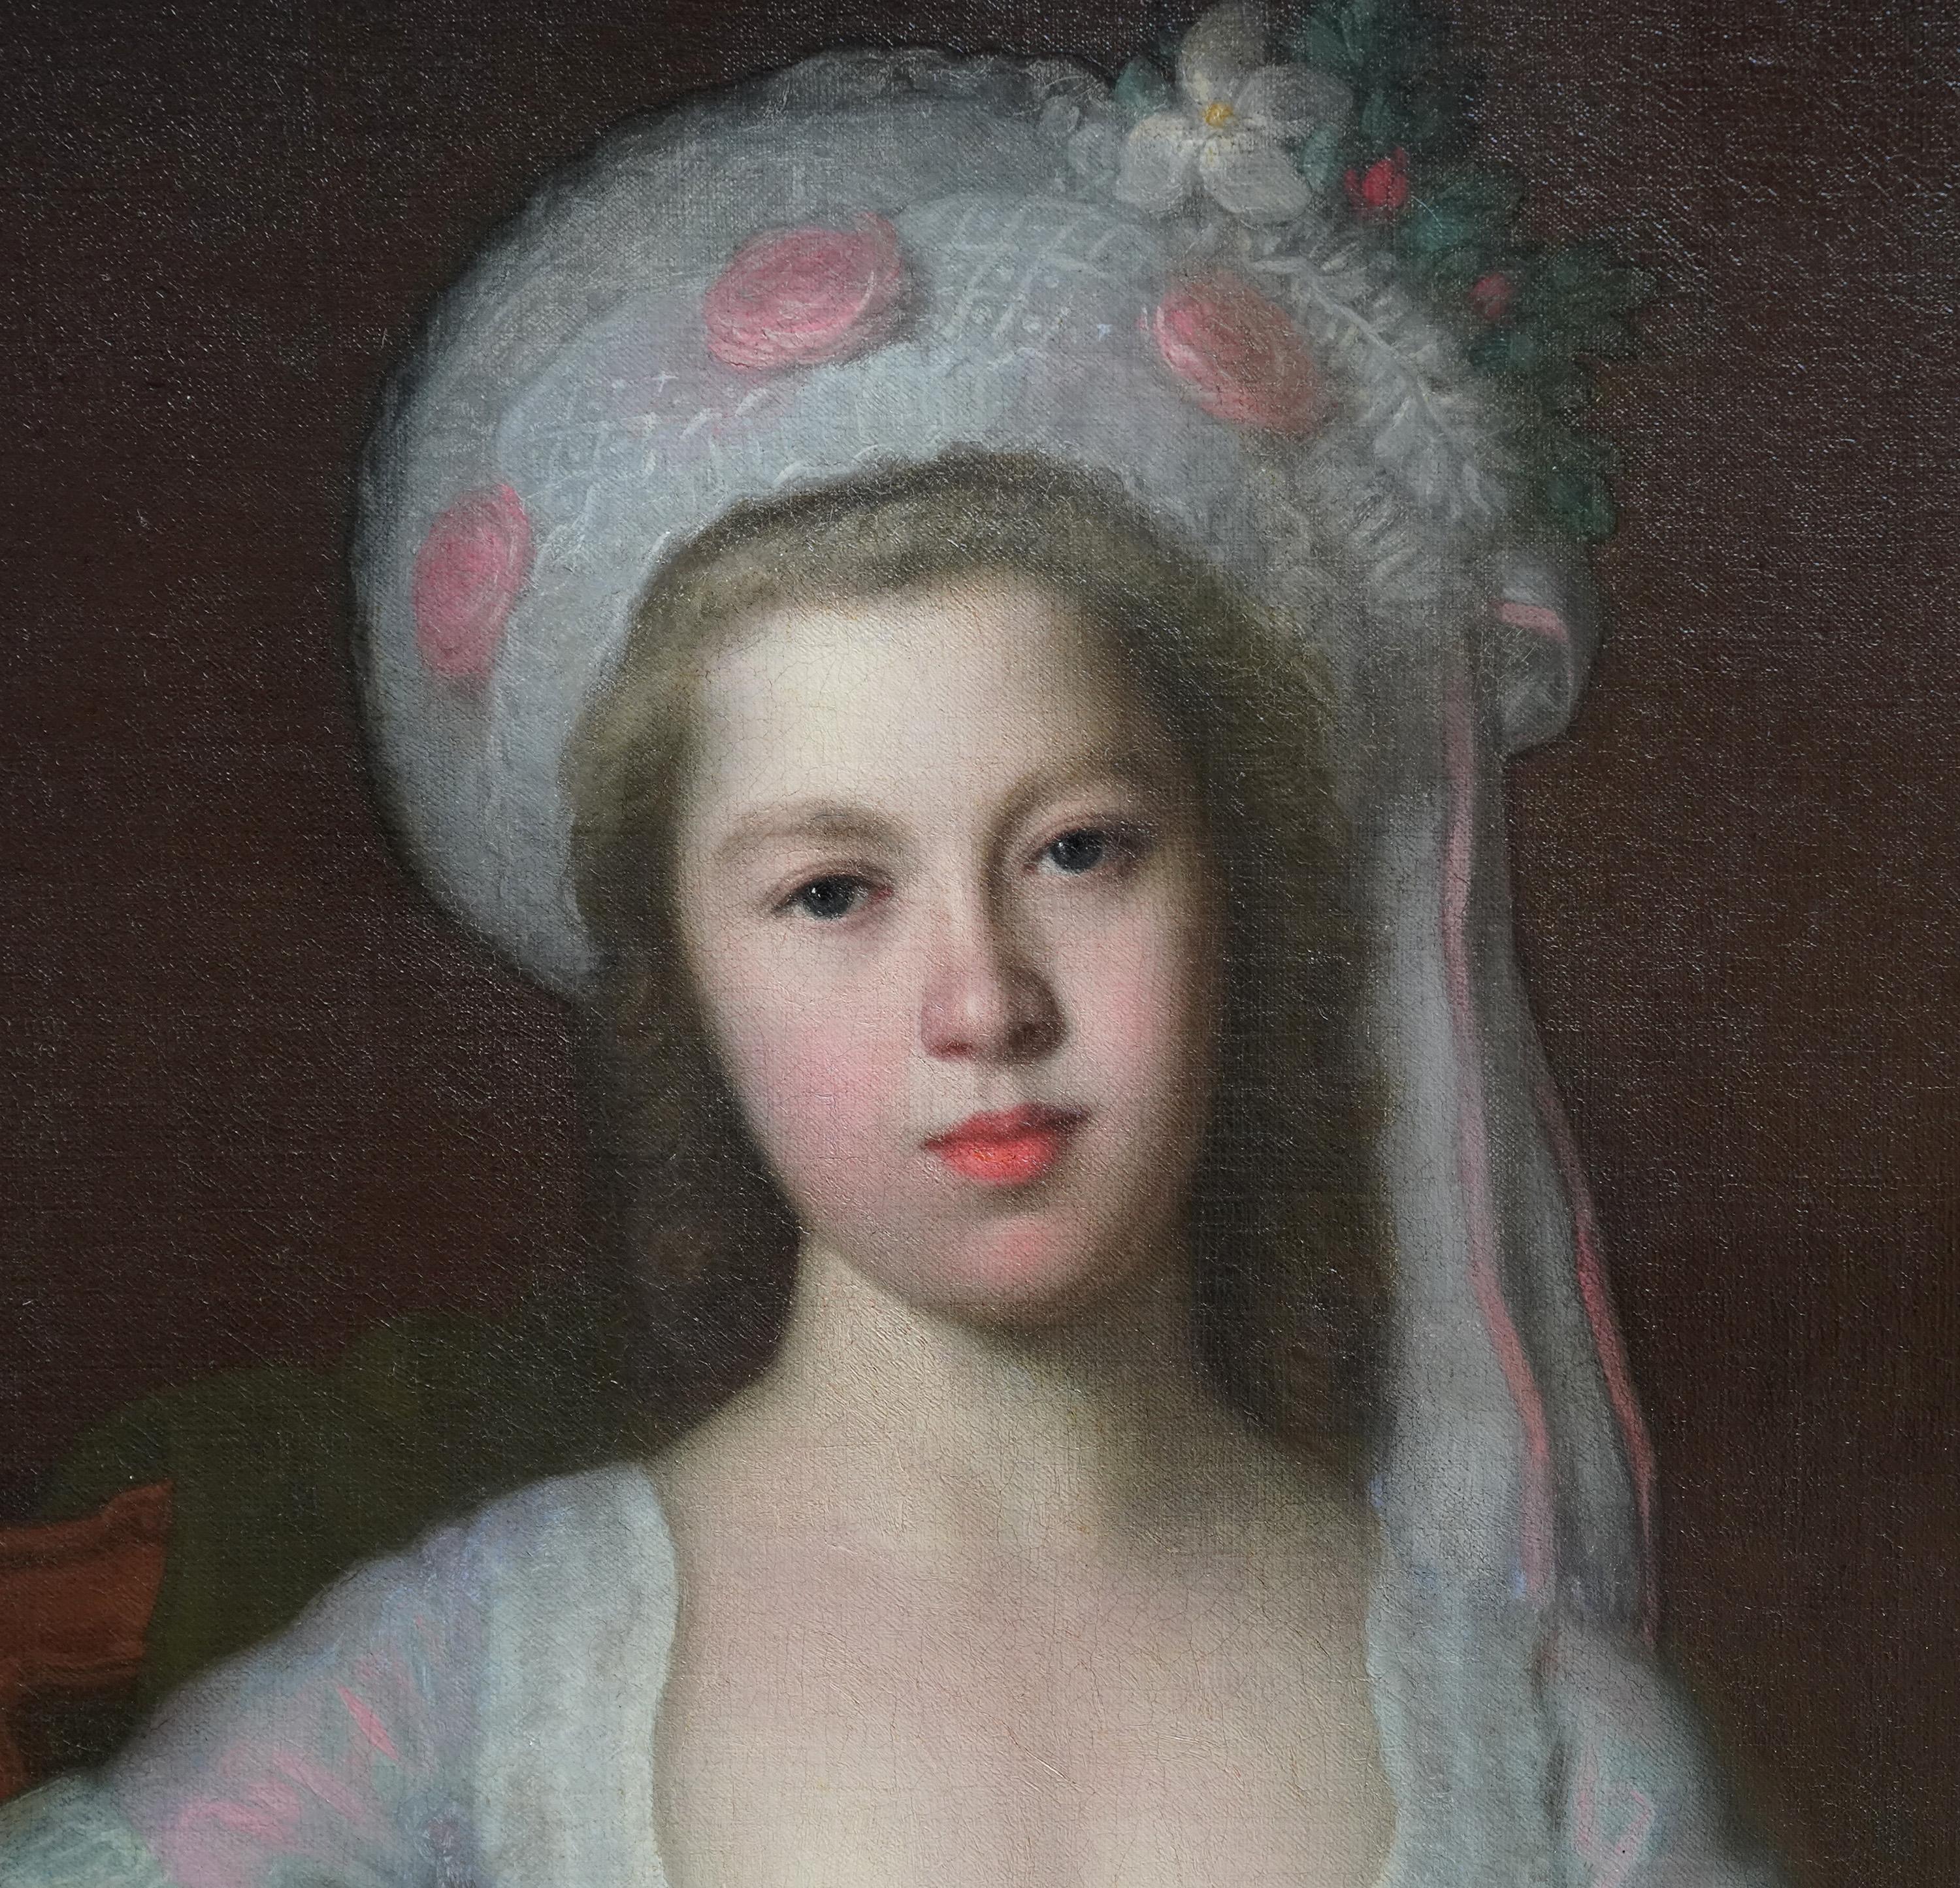 This lovely British 18th century Old Master portrait oil painting is  attributed to the manner of Thomas Beach. The sitter is Silvestra Monypenny when she was about 12. She is the only daughter of James Monypenny of Maytham estate and sister to